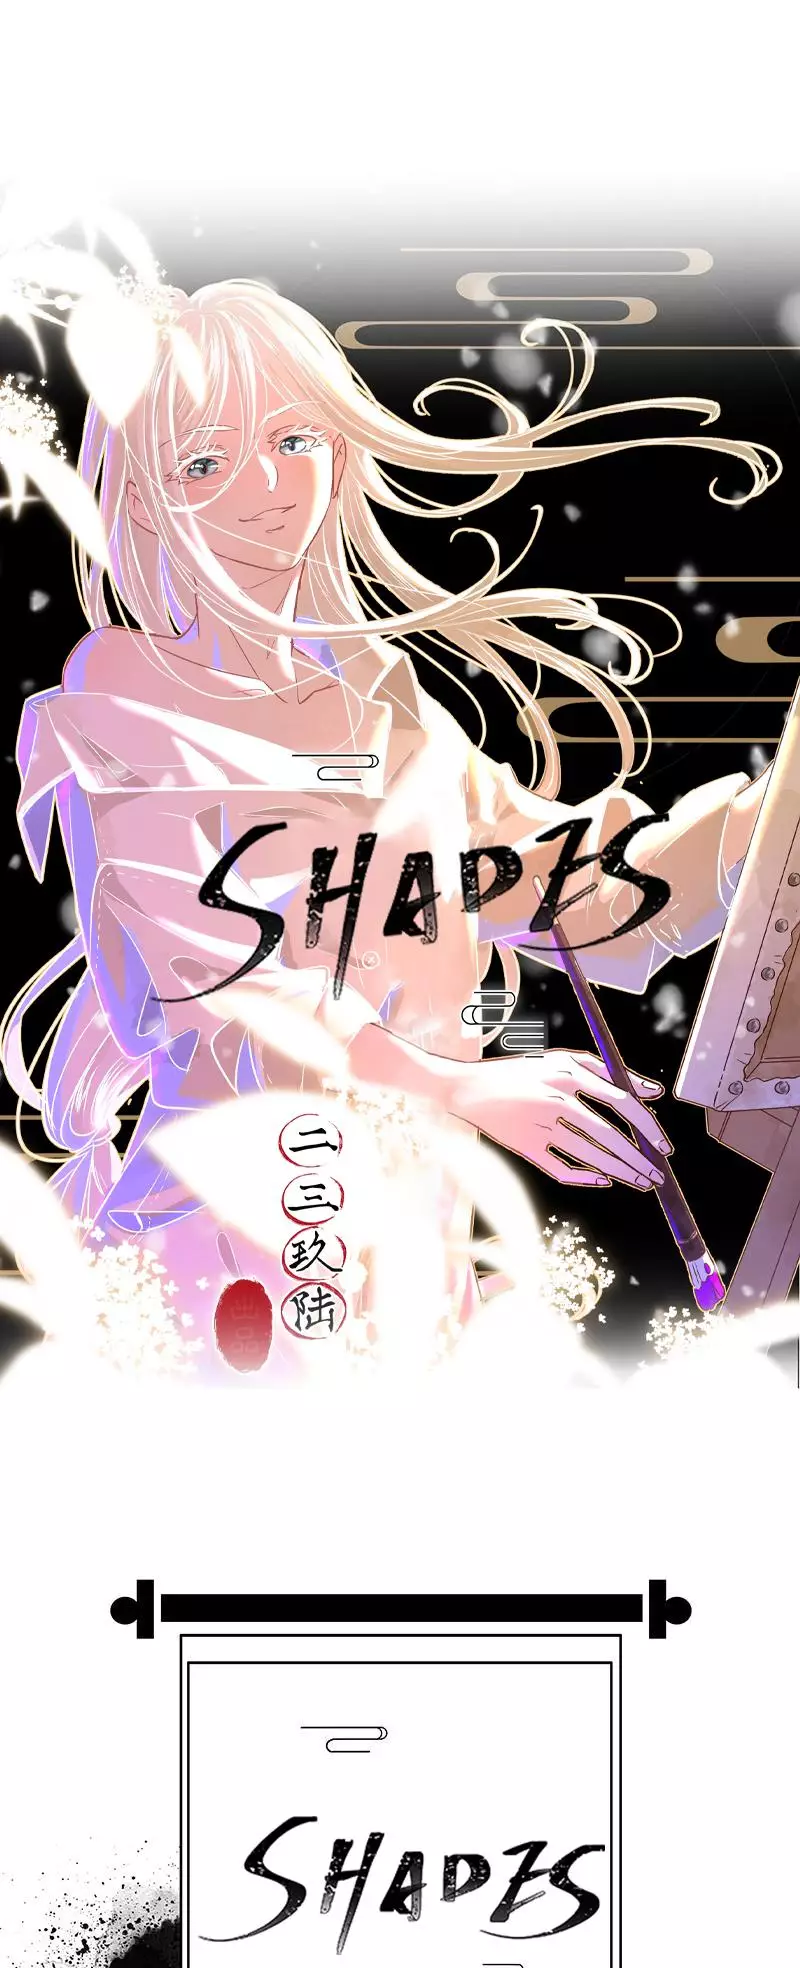 Shades - 55.1 page 1-6d7849ff